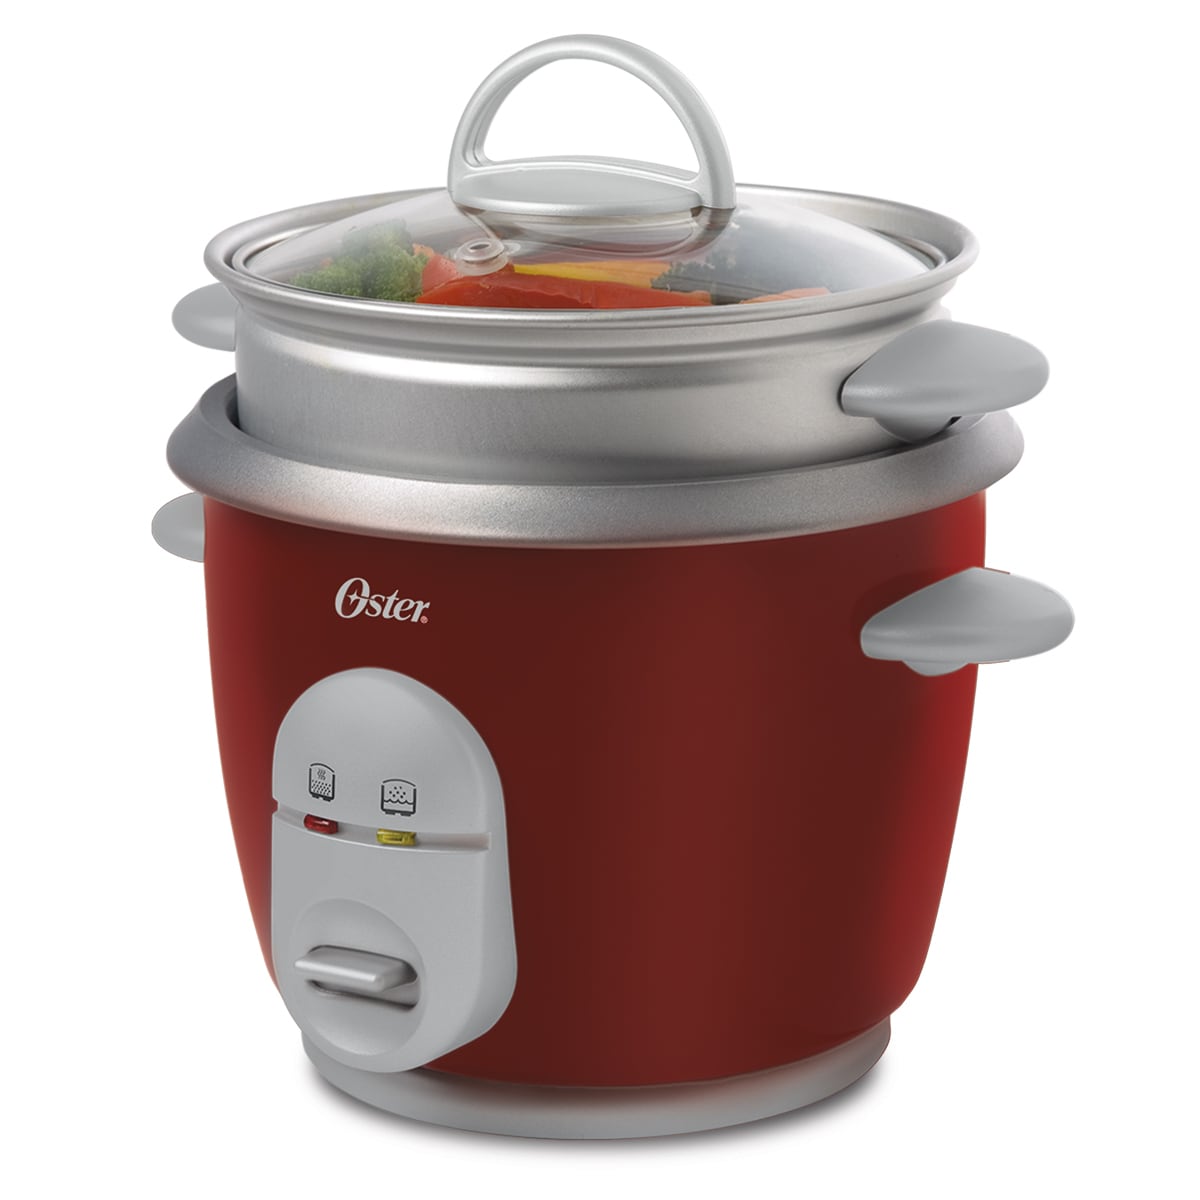 Oster Rice Cooker - Lil Dusty Online Auctions - All Estate Services, LLC